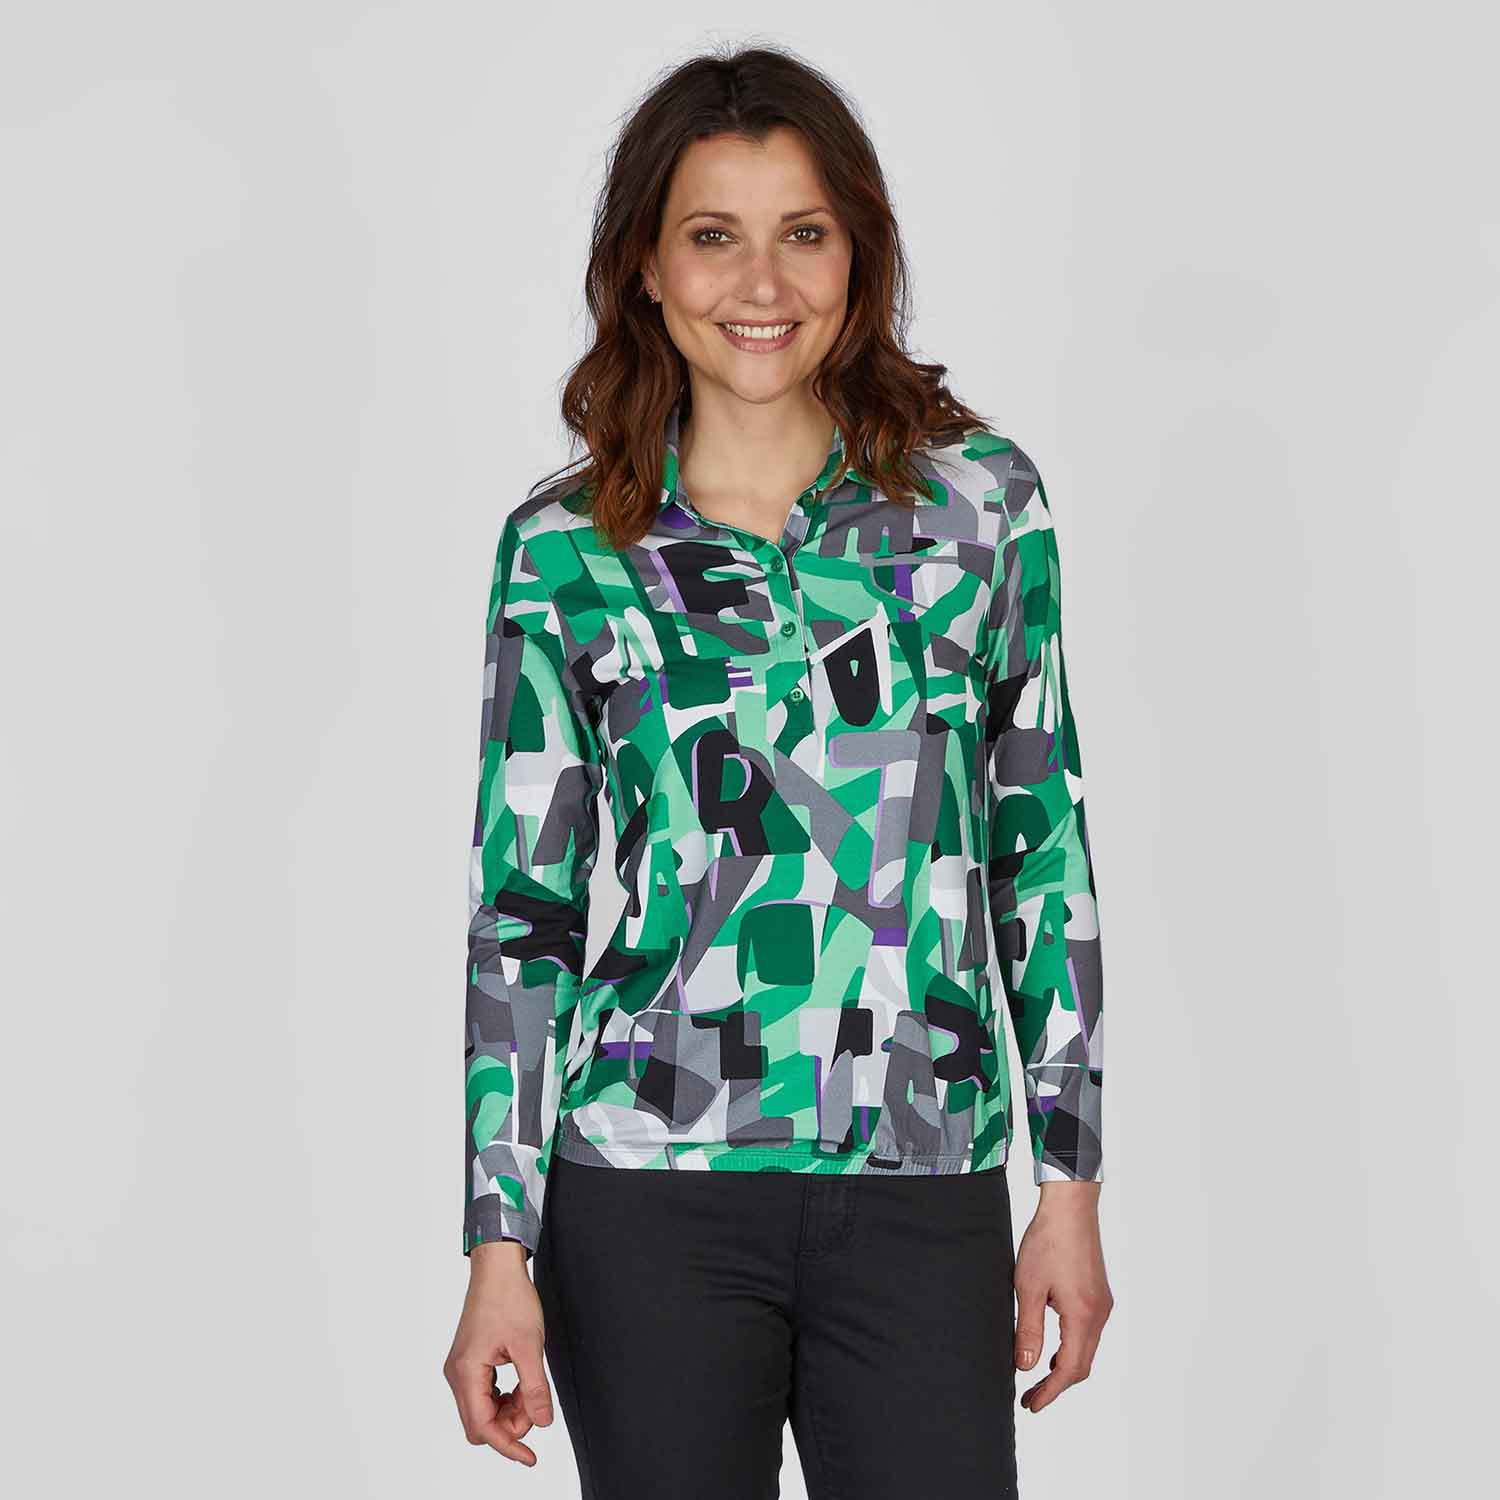 Shirt Obsessions Polo 51-124357 – in RABE – Patterned Emerald